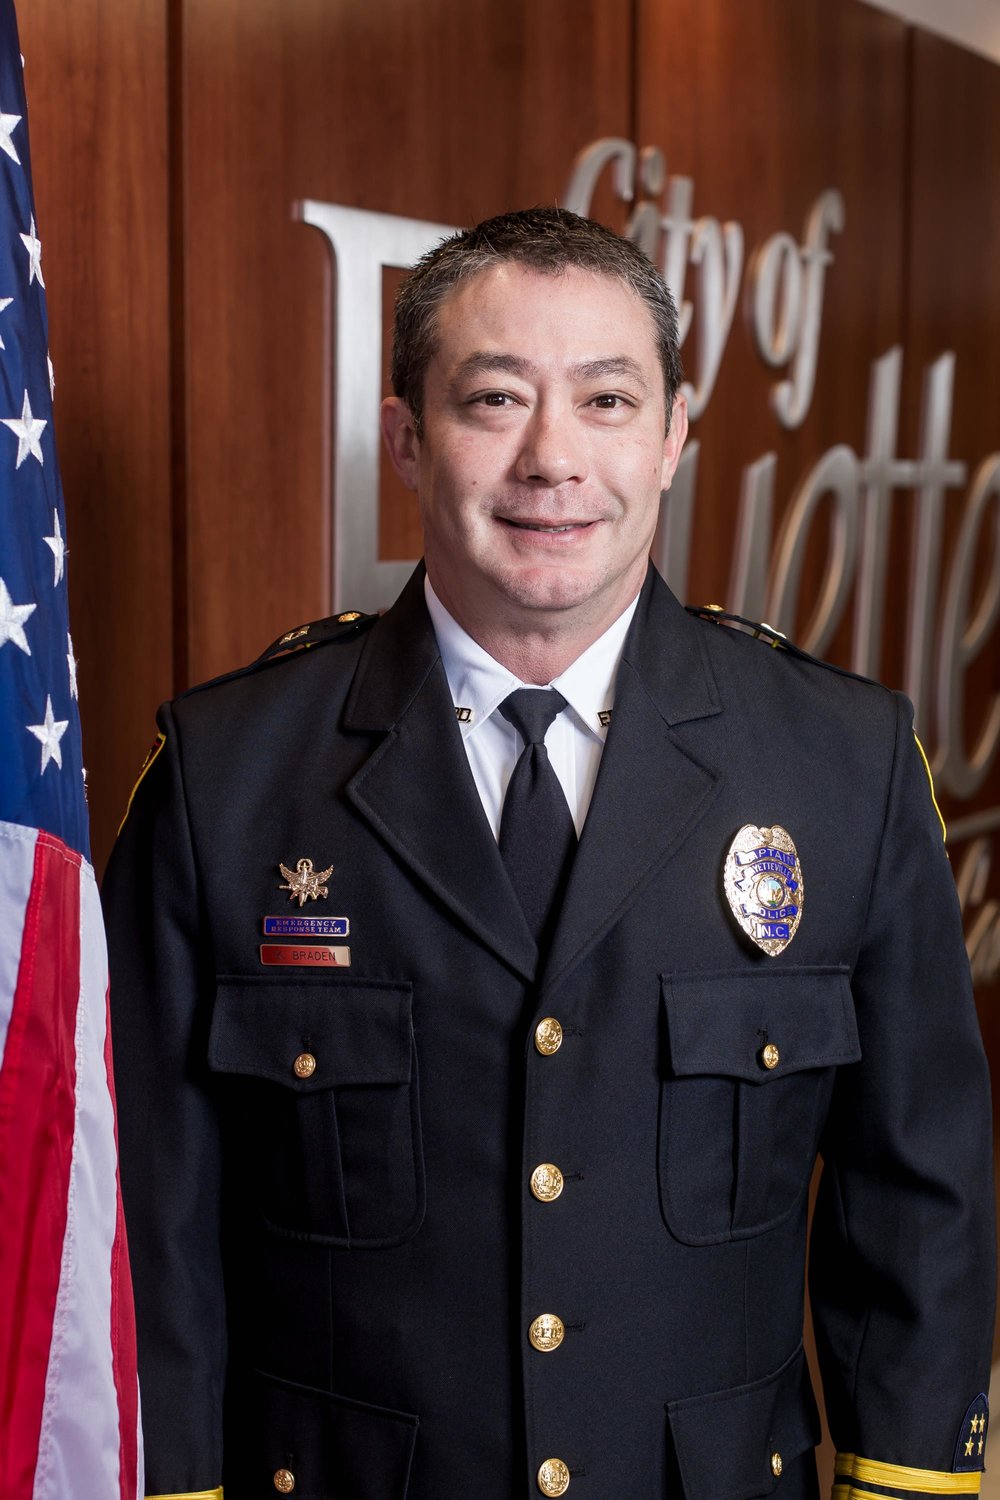 Assistant Chief Kemberle Braden commands the Field Operations Bureau for the department, which is made up of various patrol and investigative units and oversees patrol operations, major crimes and vice operations.